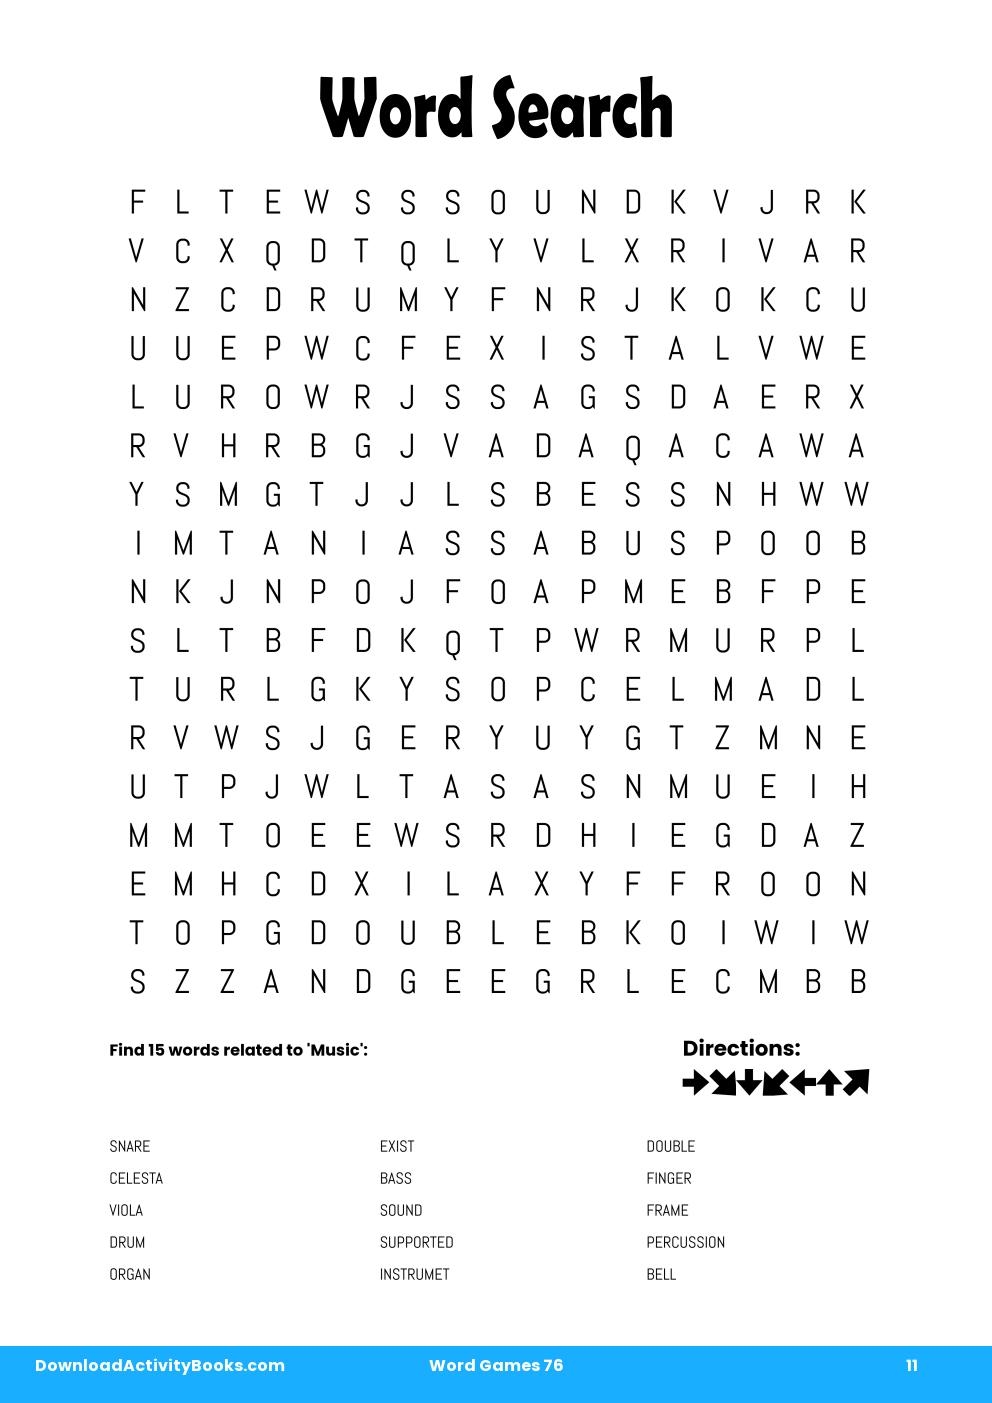 Word Search in Word Games 76